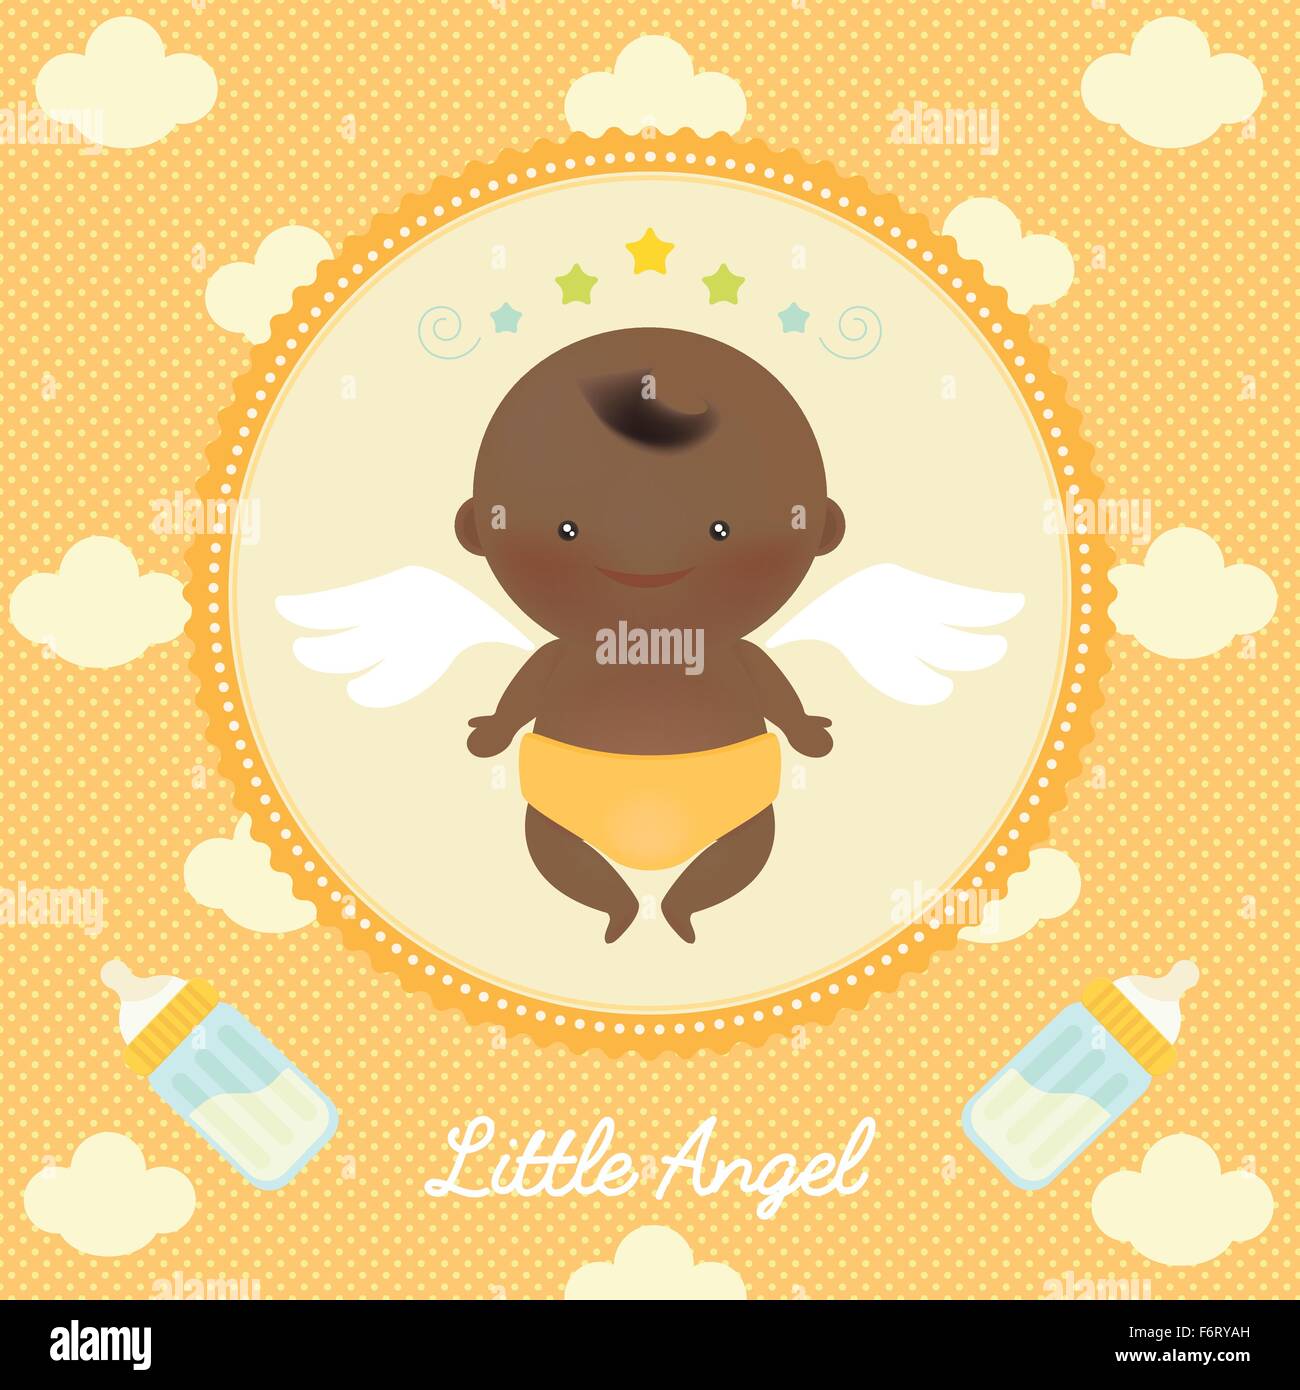 Vector illustration of cute angel African baby with wings on dots and clouds in the background. Stock Vector